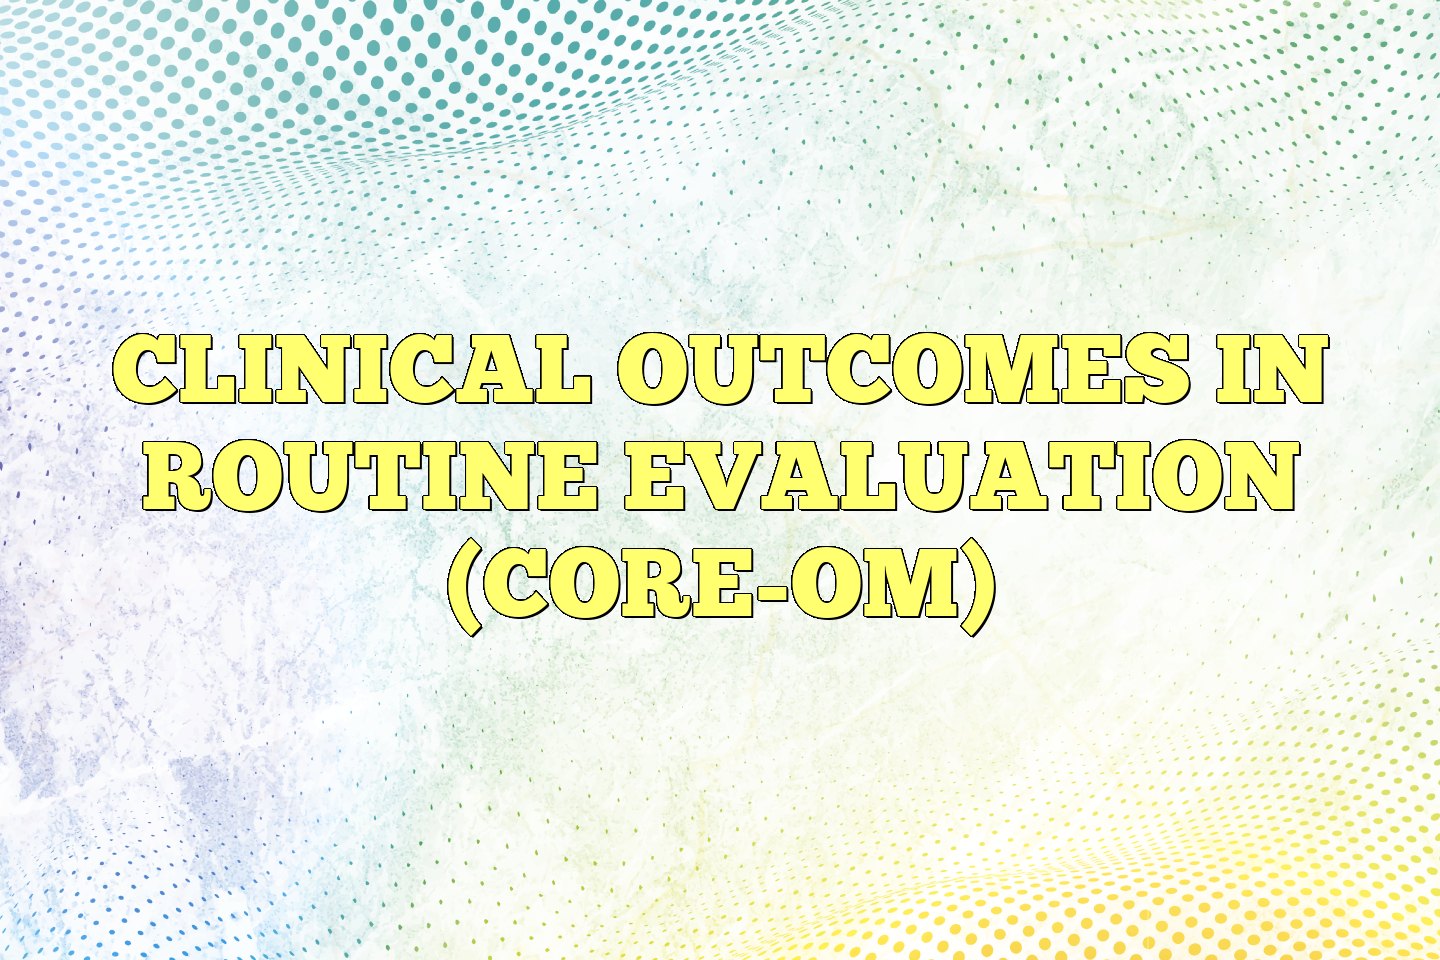 https://scales.arabpsychology.com/wp-content/uploads/2023/03/clinical-outcomes-in-routine-evaluation-core-om.jpg